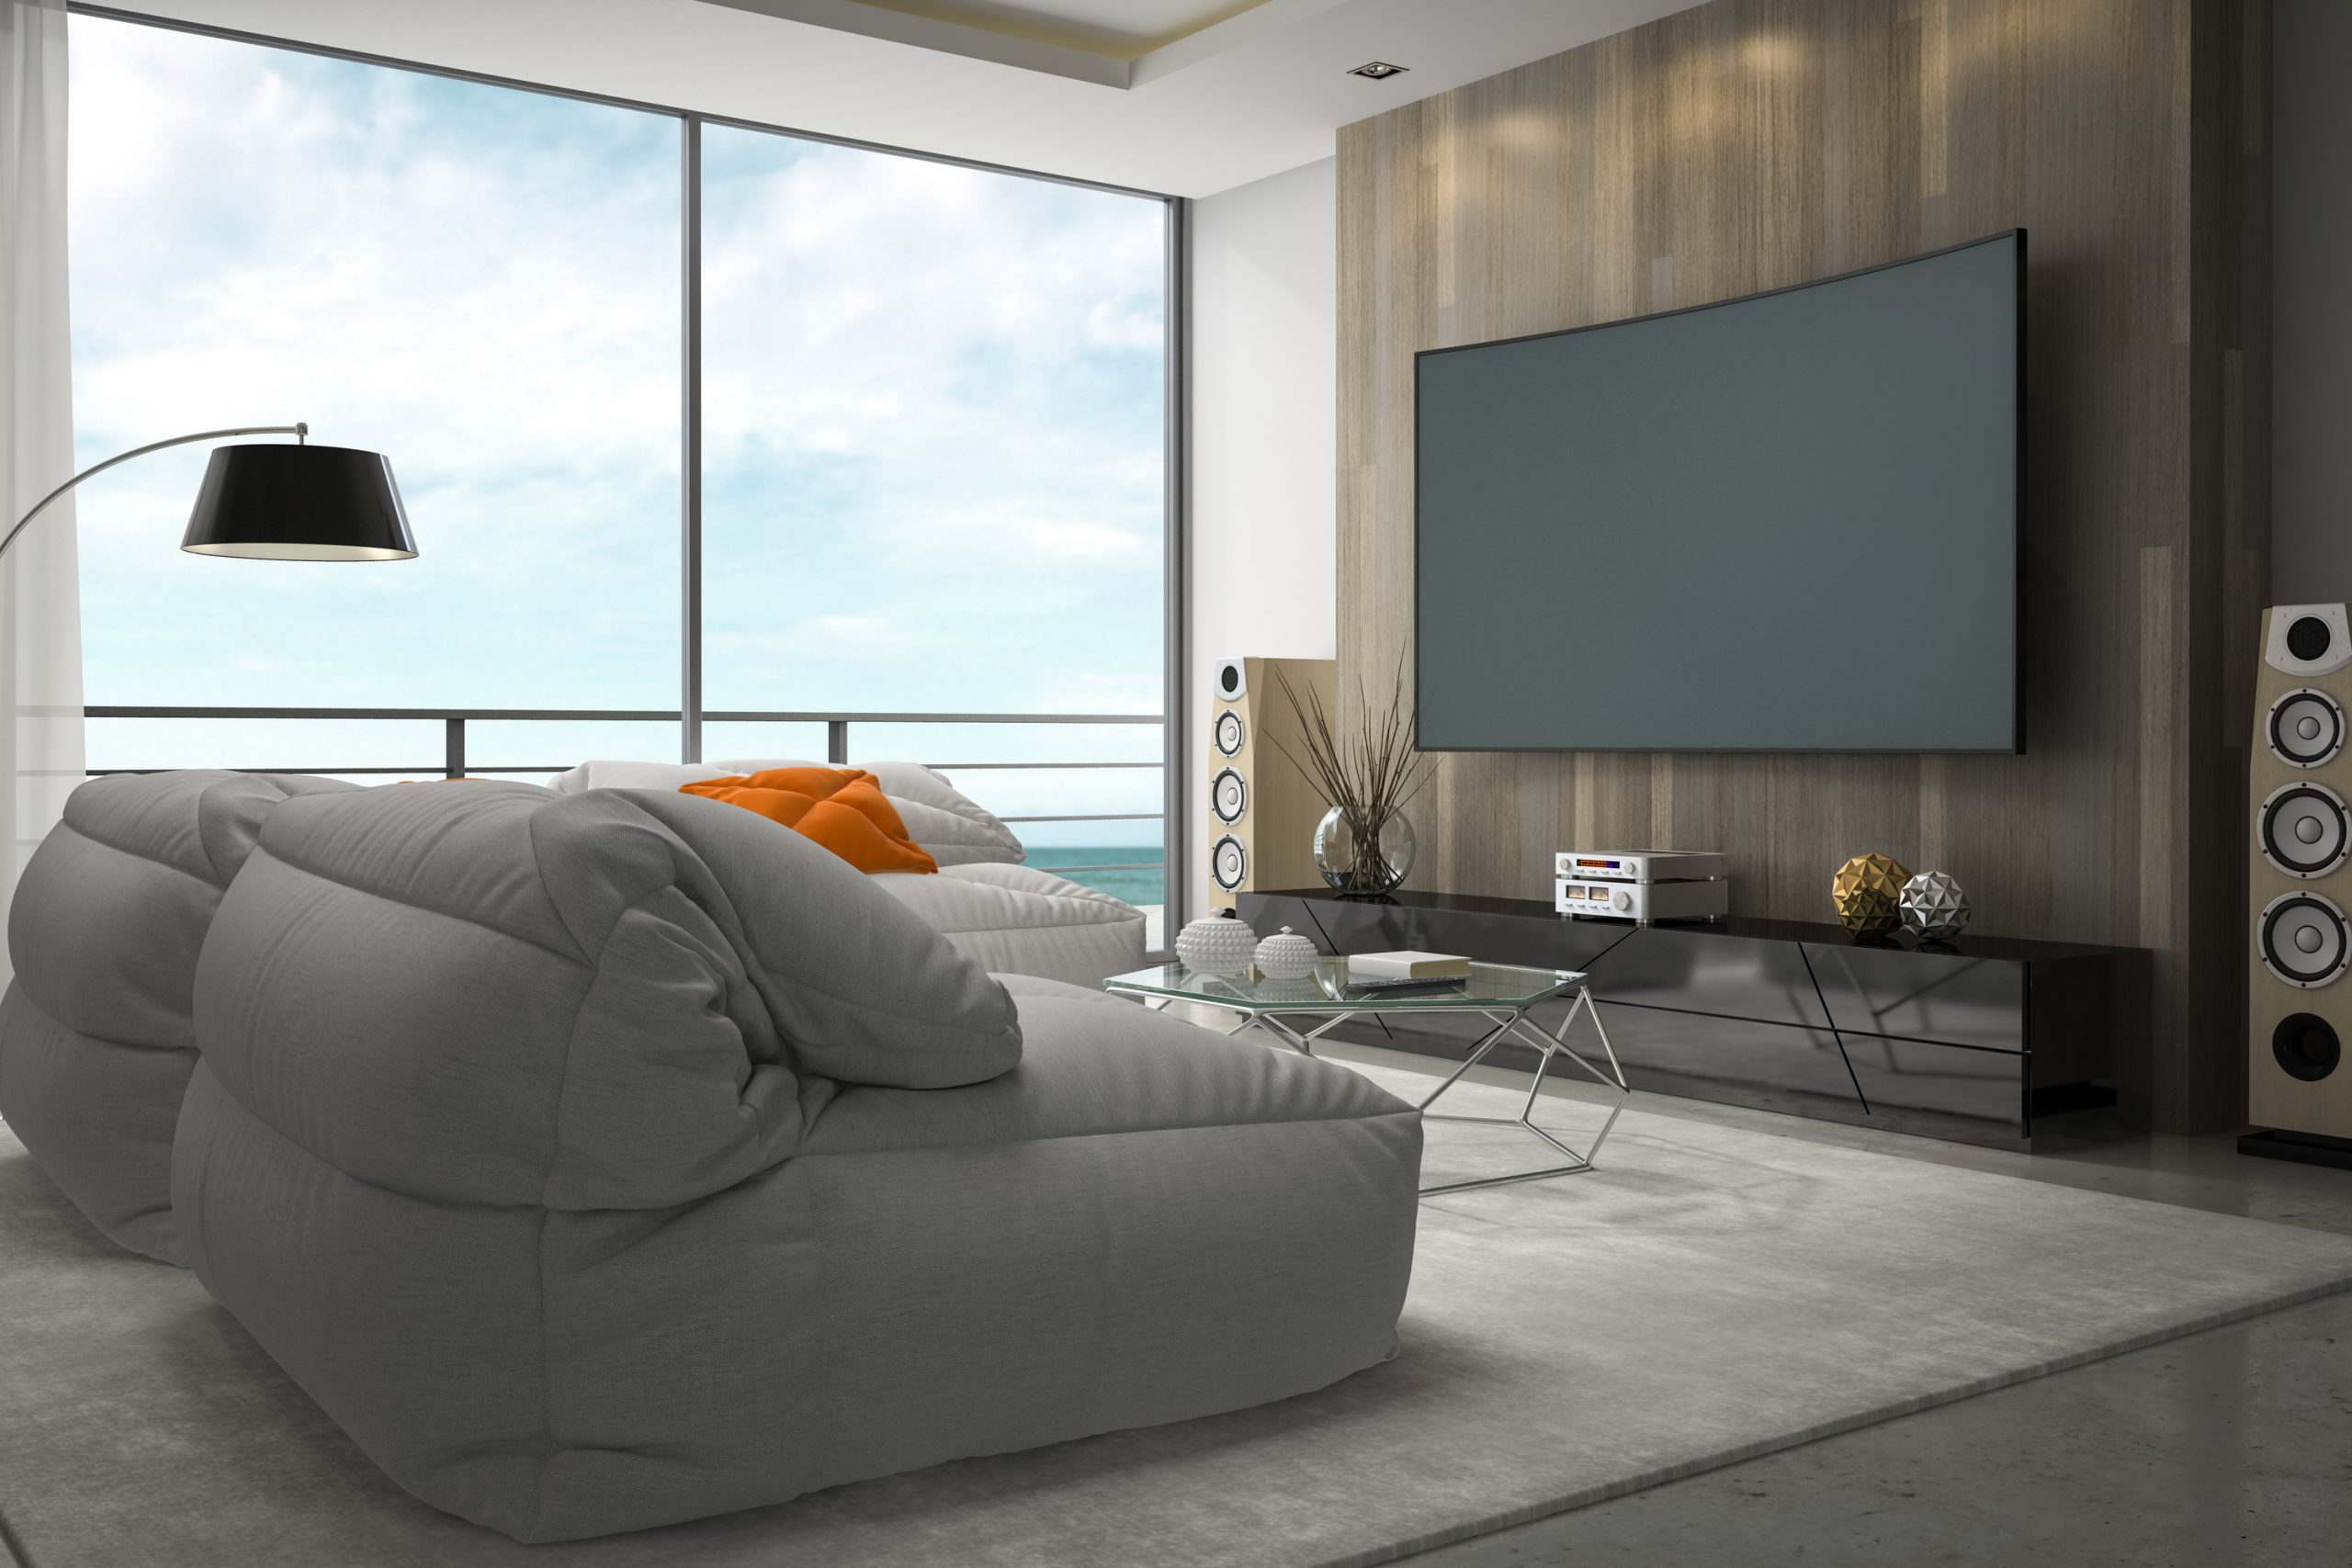 If you have always dreamed of having a home theater, check out one of these incredibly easy home theater designs. These bean bags make amazing seats for your home theater. 